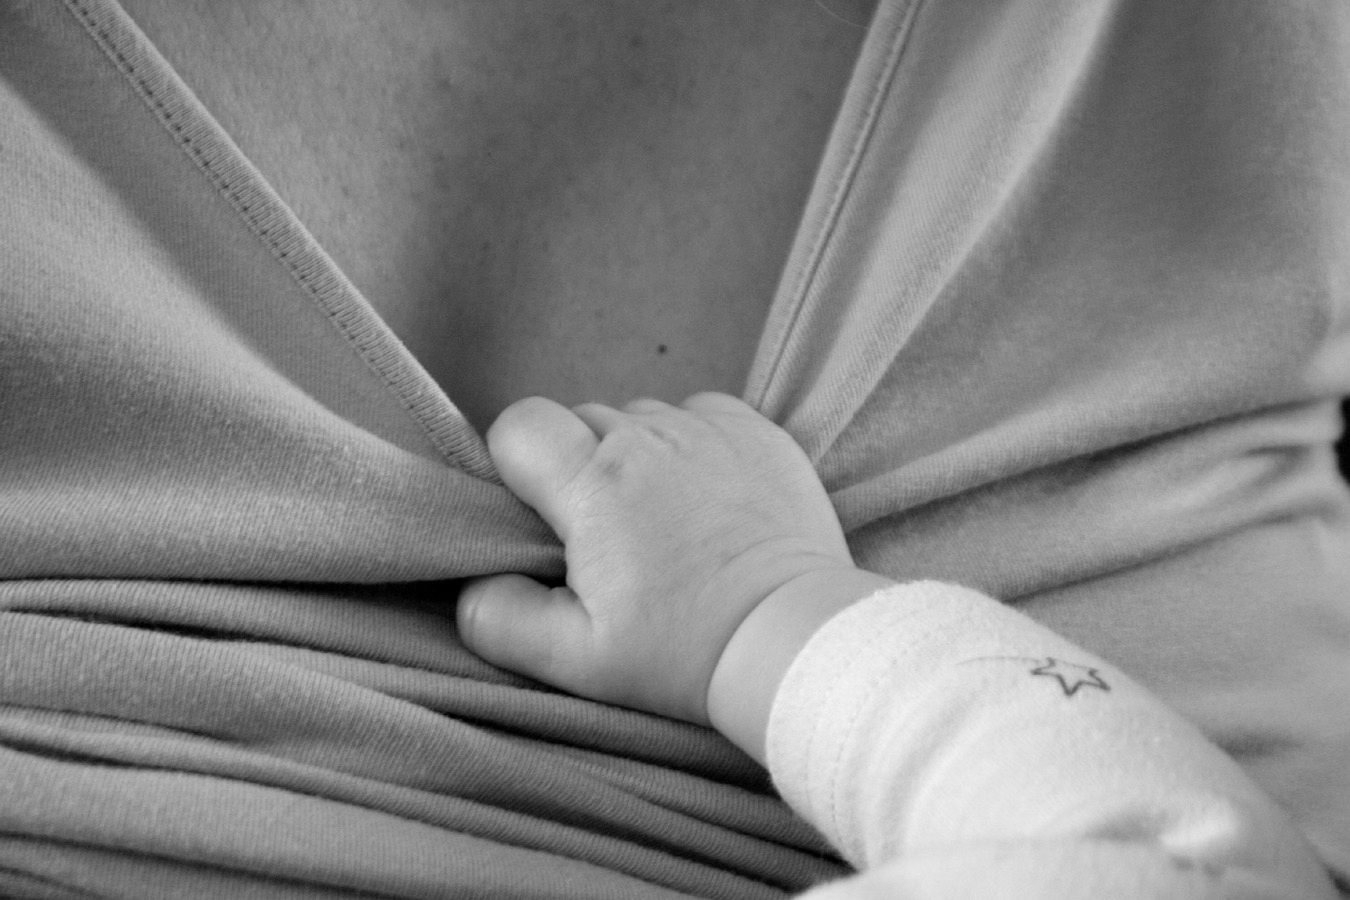 A baby's hand pulling at a mother's top